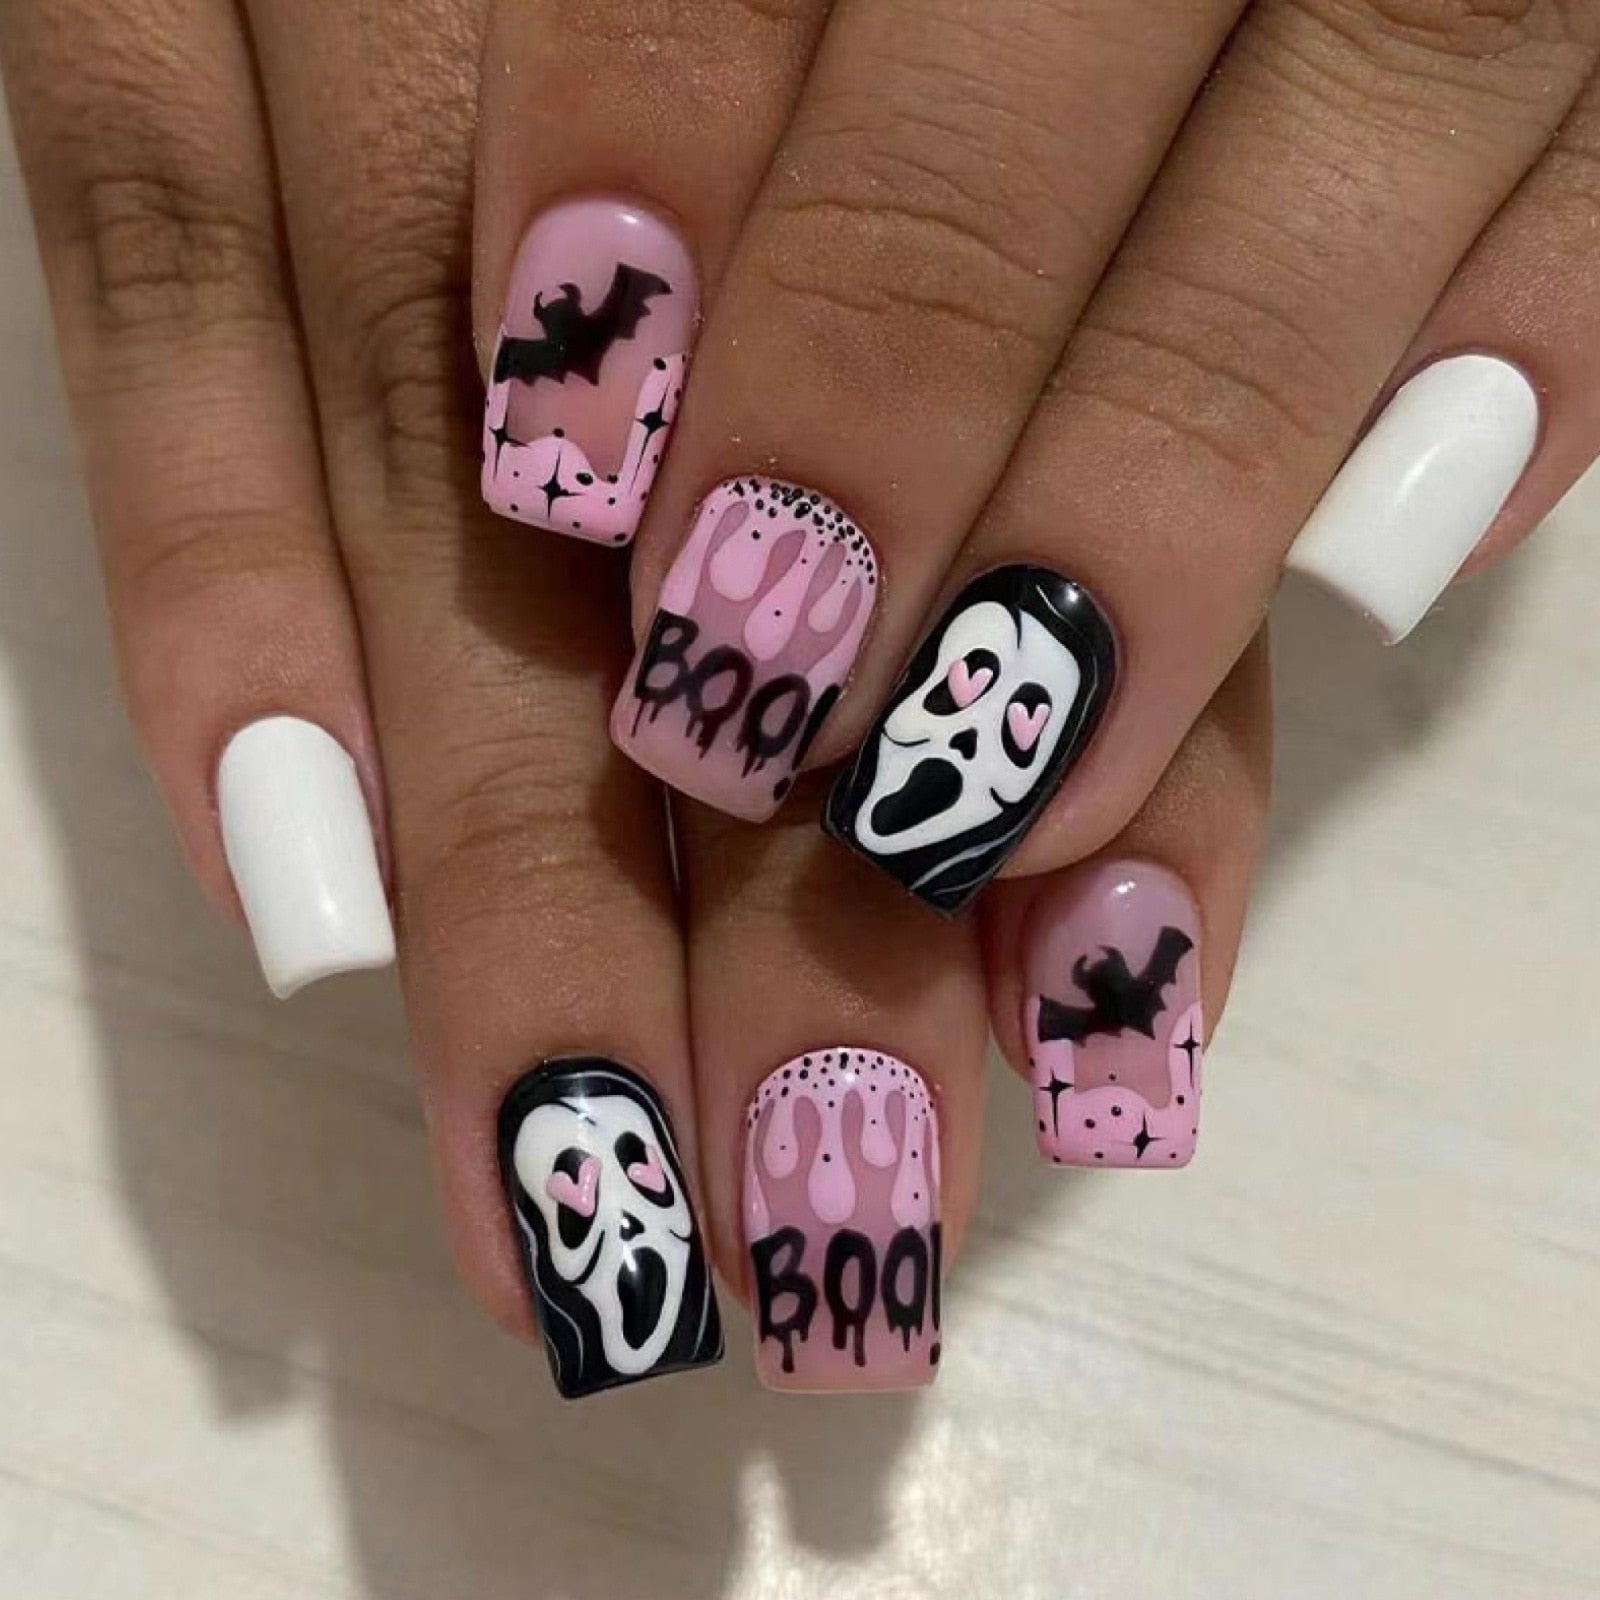 24pcs Sweet Cool Pink Black False Nails Halloween Skull Batch Pattern Design Press On Nail Patch Wearable Artificial Nail Tips Basso & Brooke